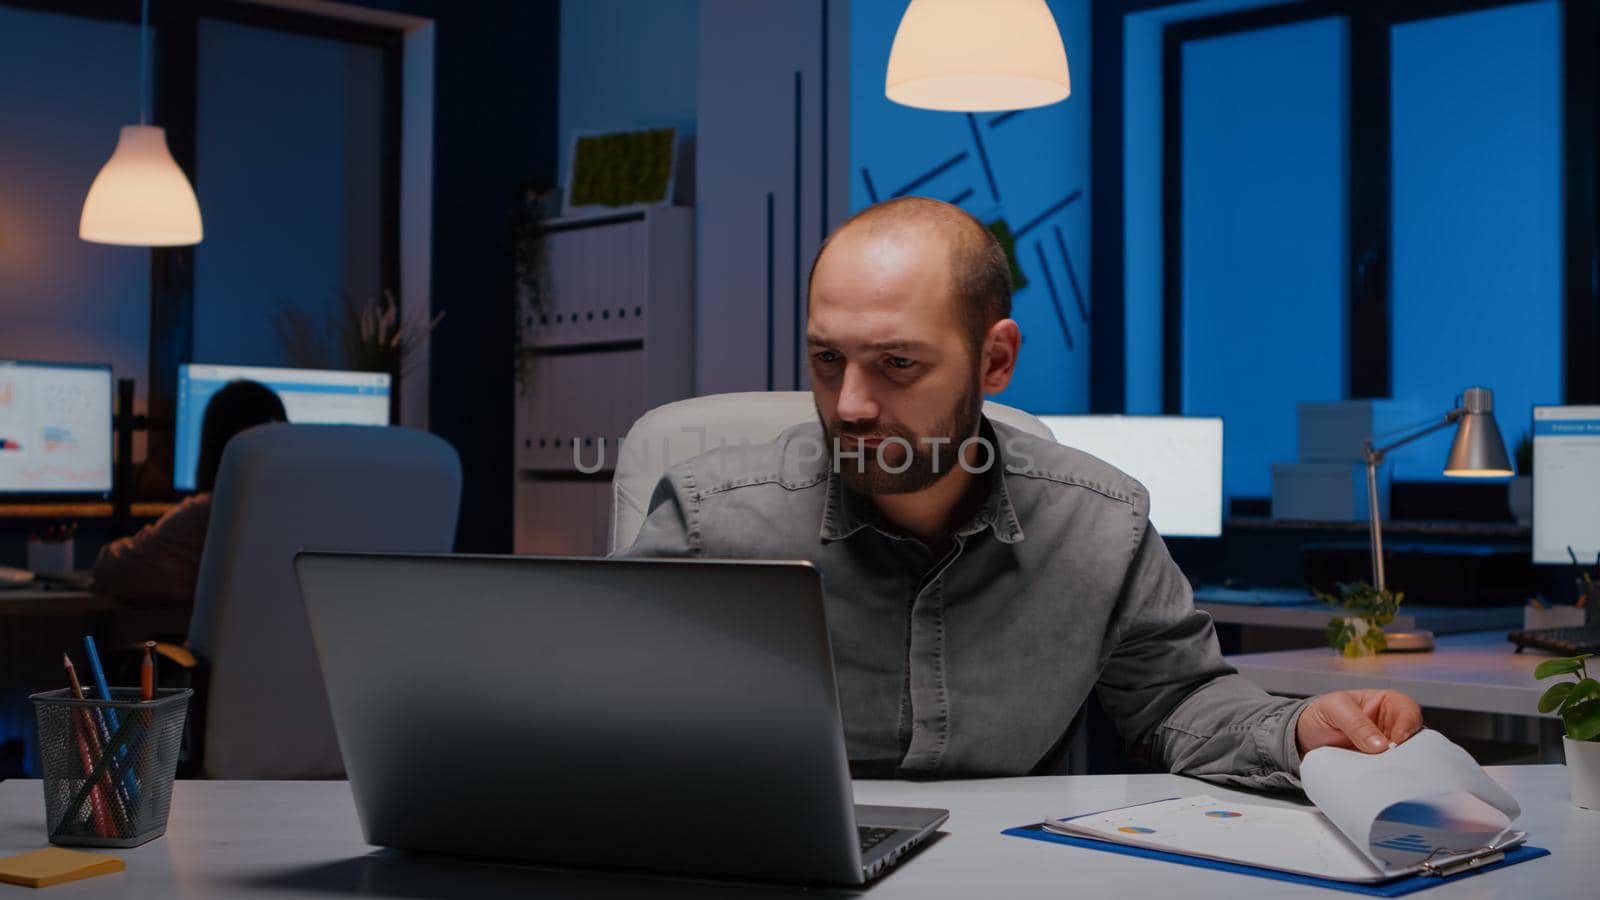 Exhausted workaholic businessman analysing marketing statistics in startup office late at night. Overworked entrepreneur working on financial strategy before company deadline, corporate business management